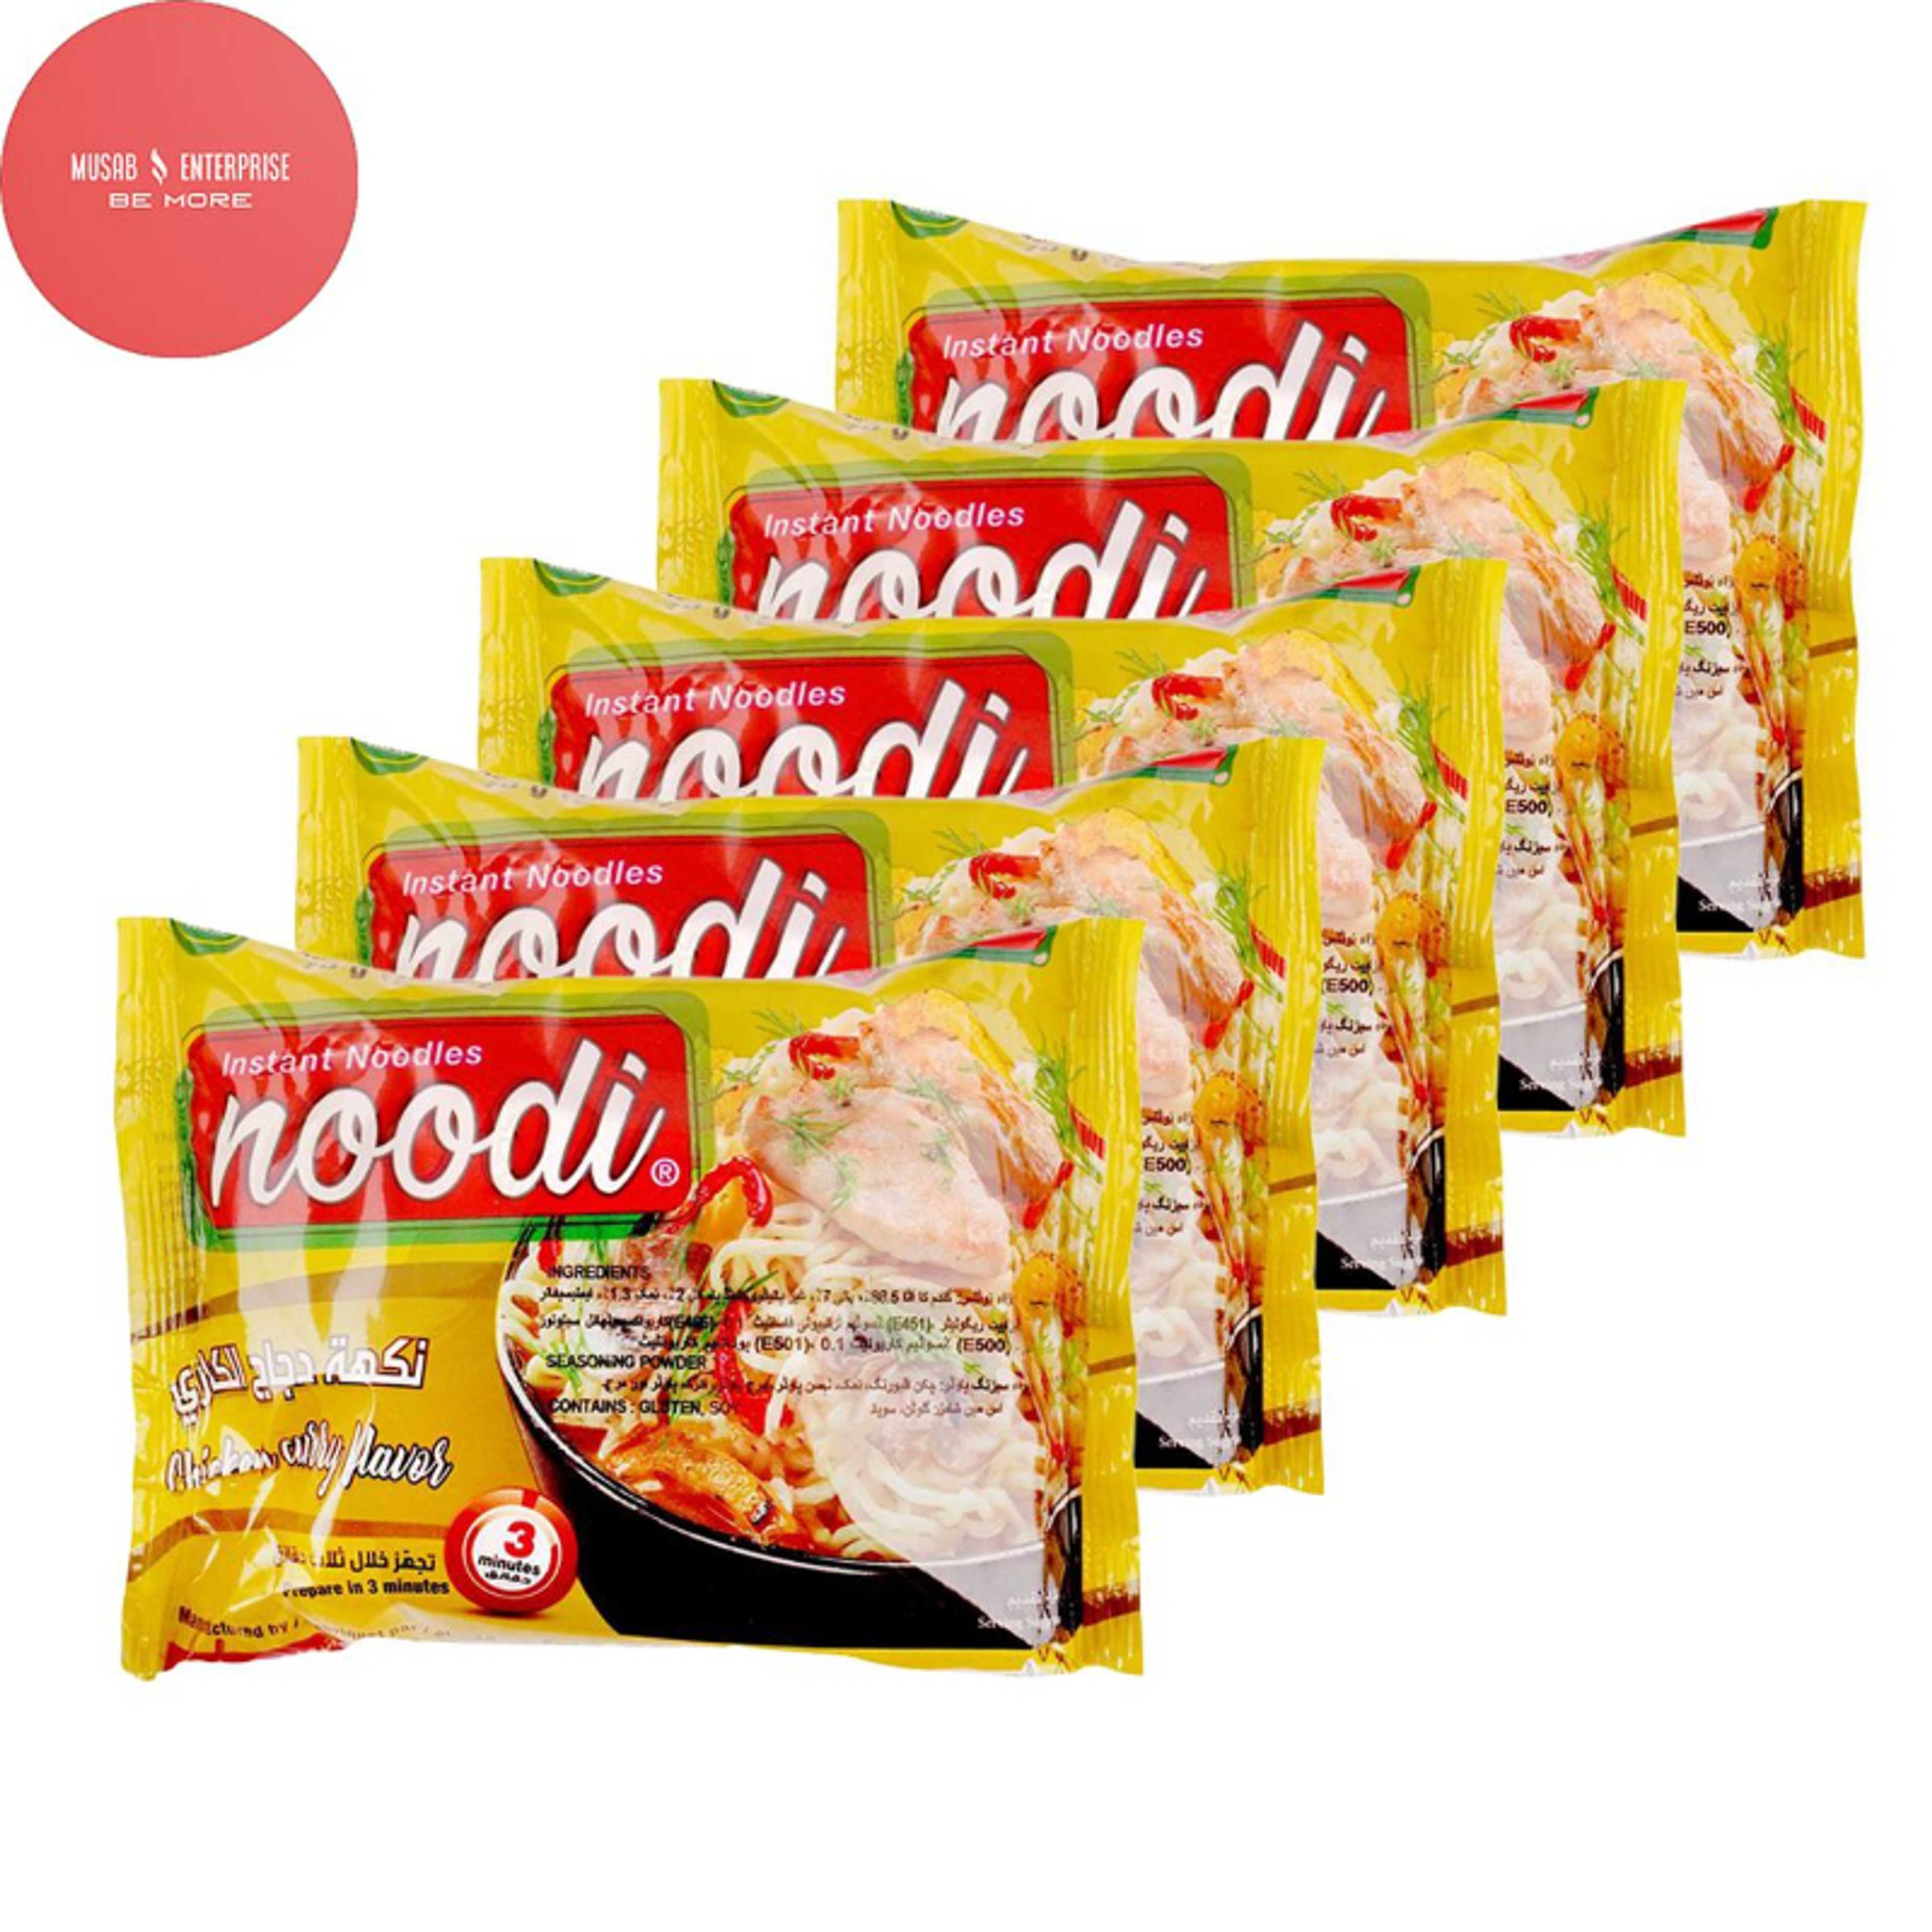 Noodi Chicken Curry Flavor Instant Noodles, 70g, Pack of 5 Noodles (Available in 9 Exciting Flavors)